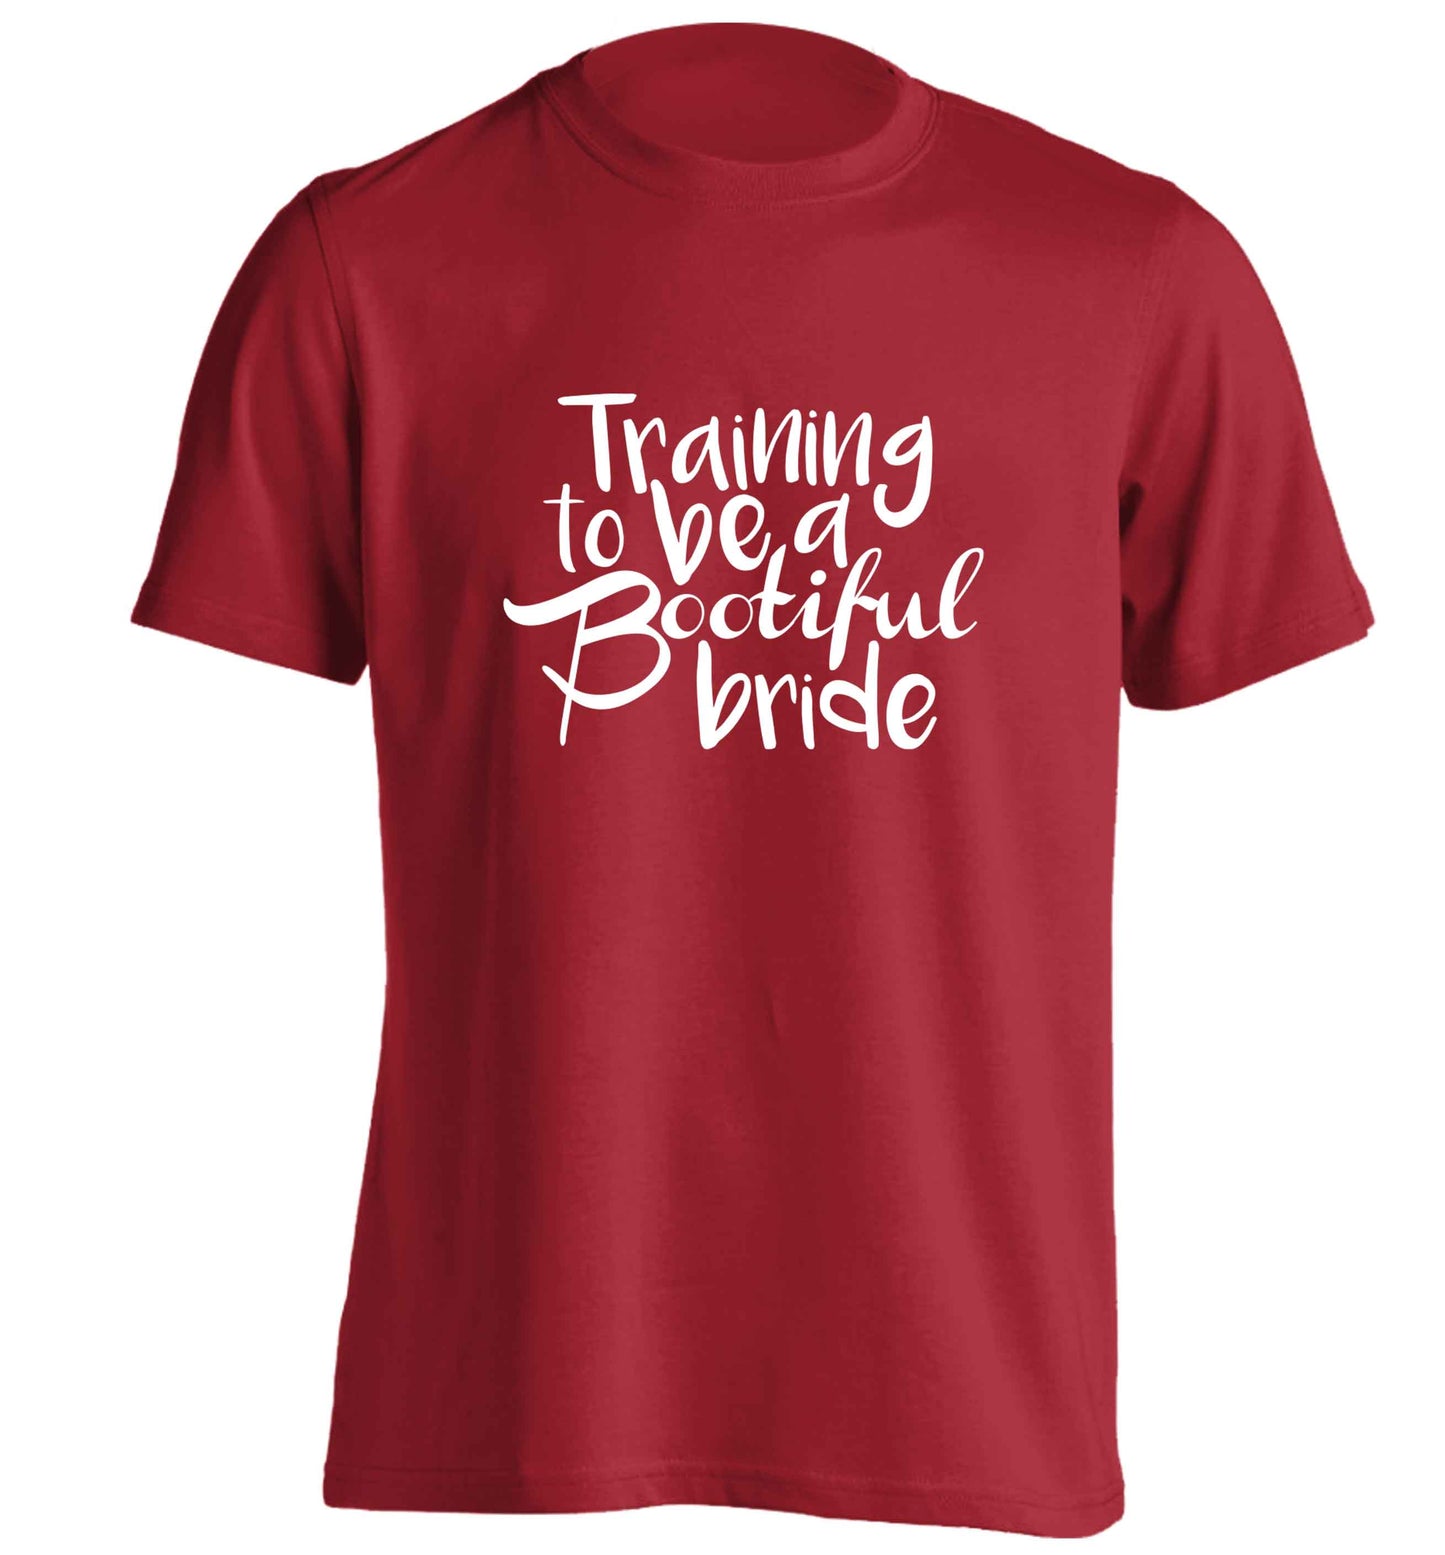 Get motivated and get fit for your big day! Our workout quotes and designs will get you ready to sweat! Perfect for any bride, groom or bridesmaid to be!  adults unisex red Tshirt 2XL